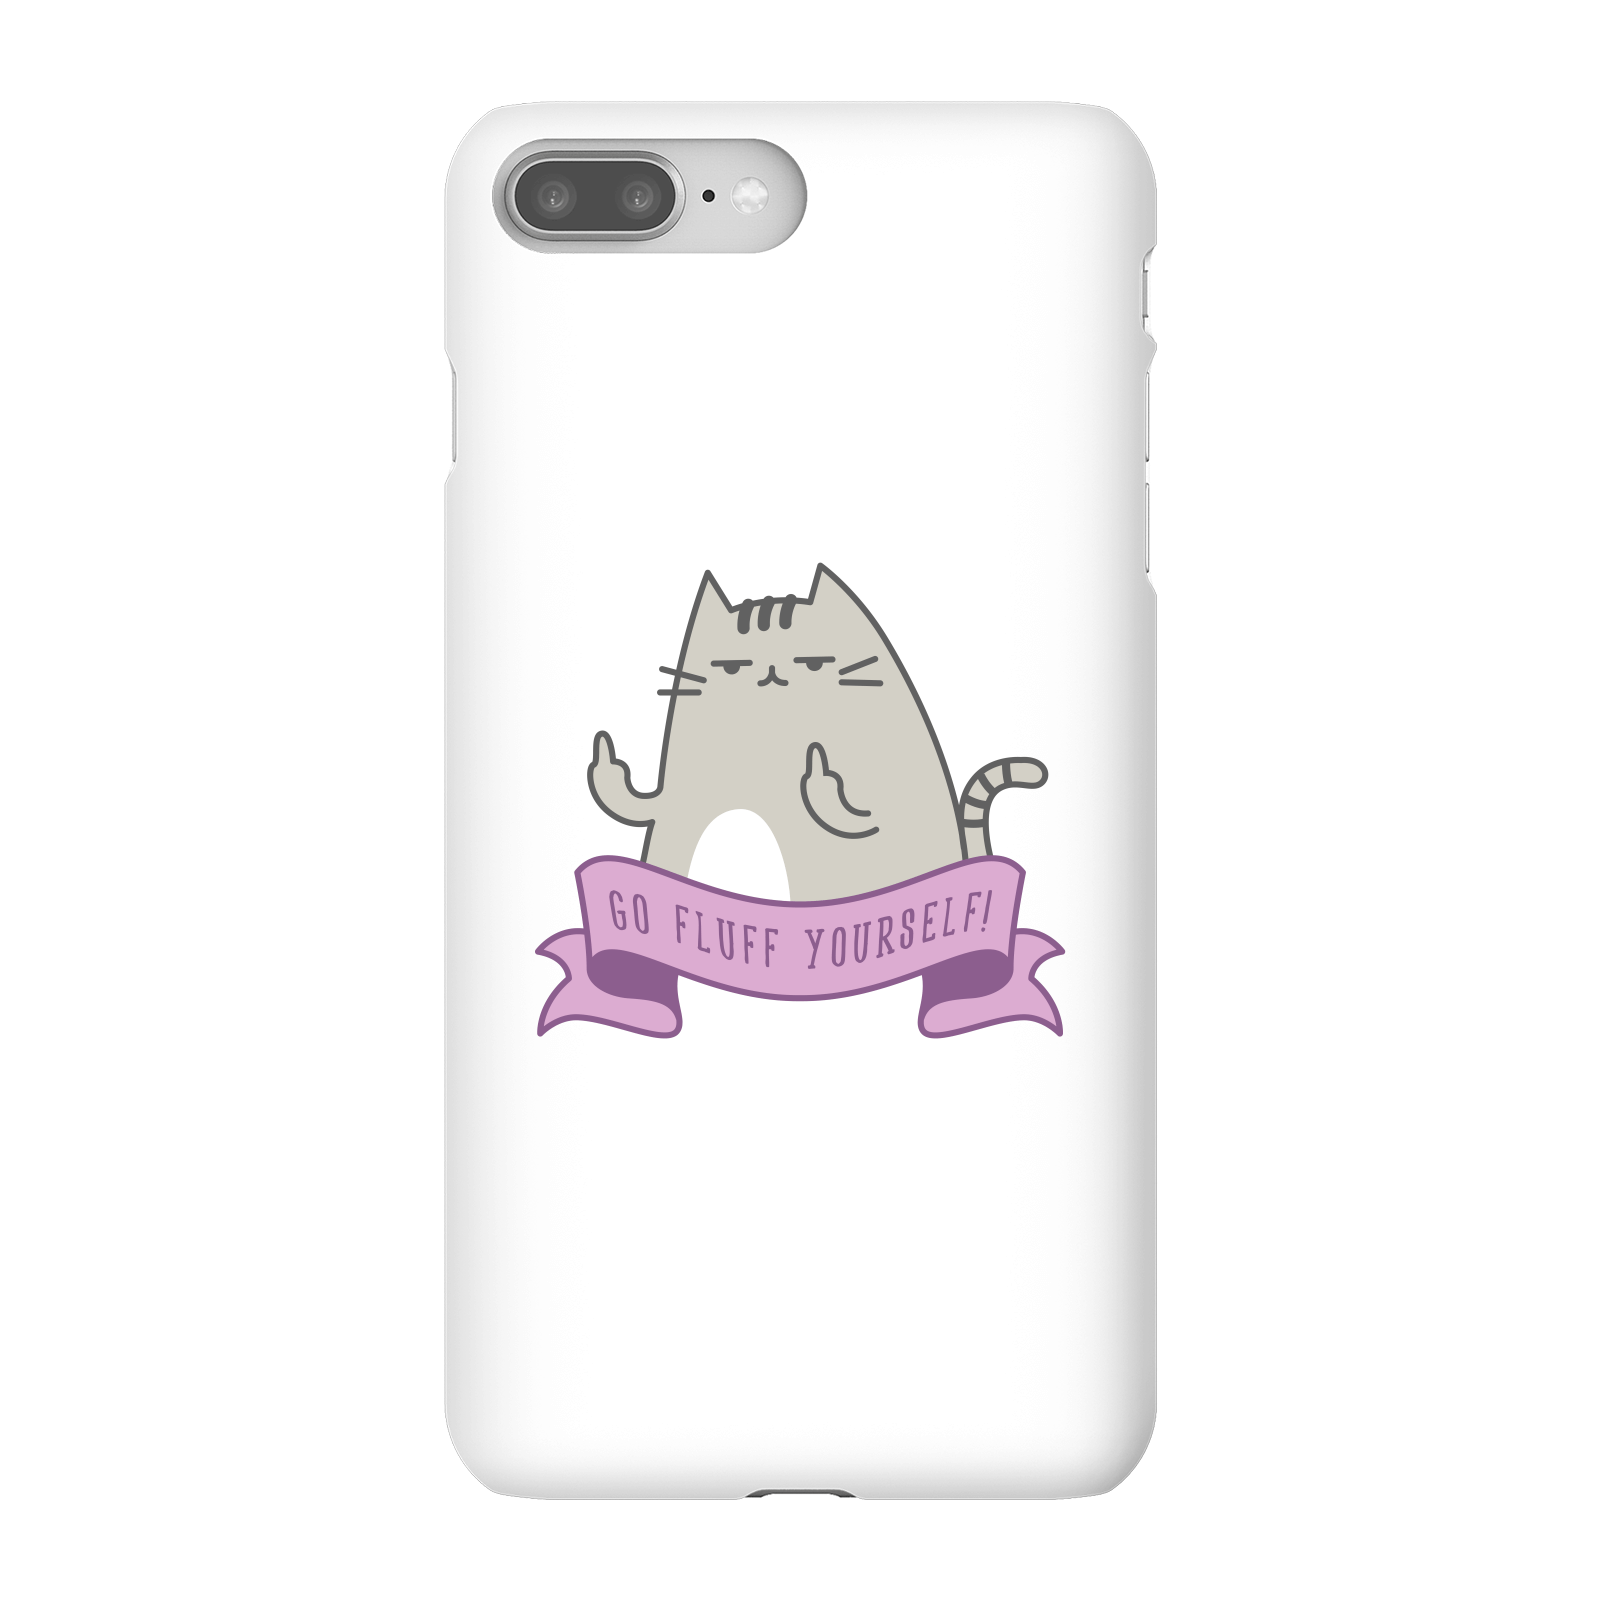 Go Fluff Yourself! Phone Case for iPhone and Android - iPhone 8 Plus - Snap Case - Matte